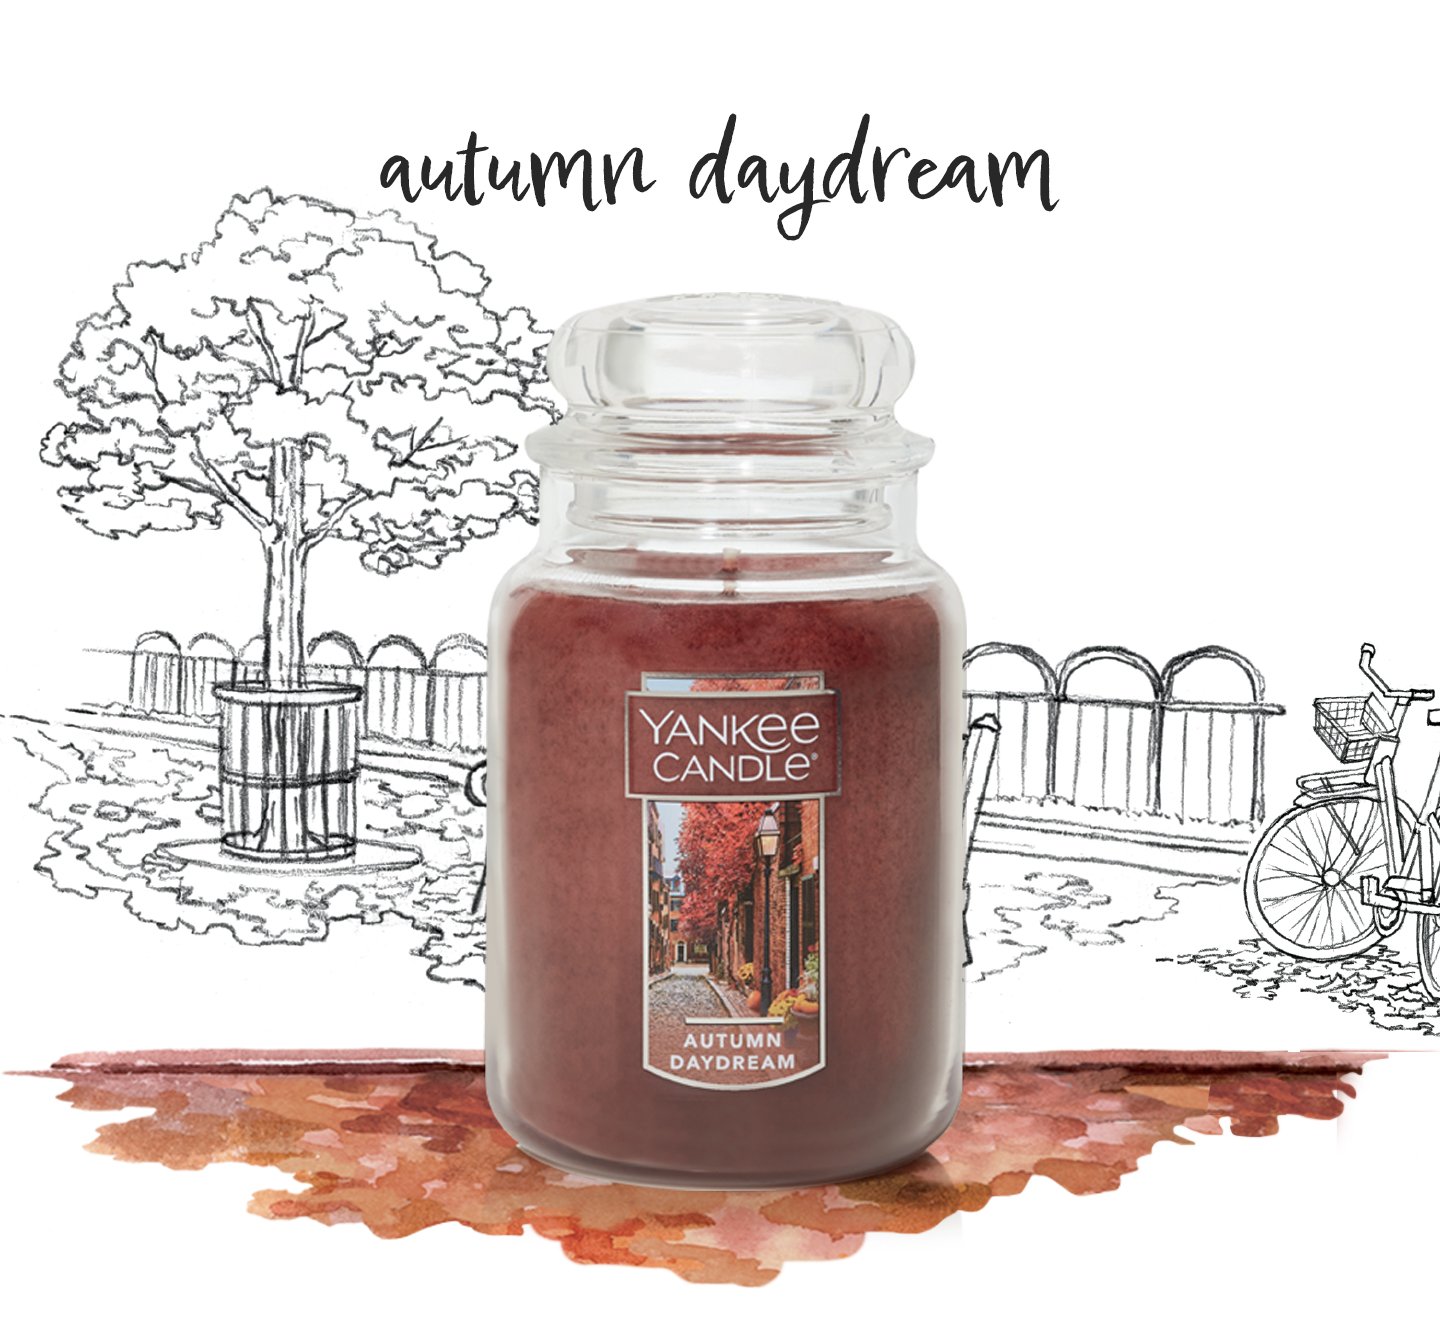 The Yankee Candle That's Perfect for Fall Is on Sale at